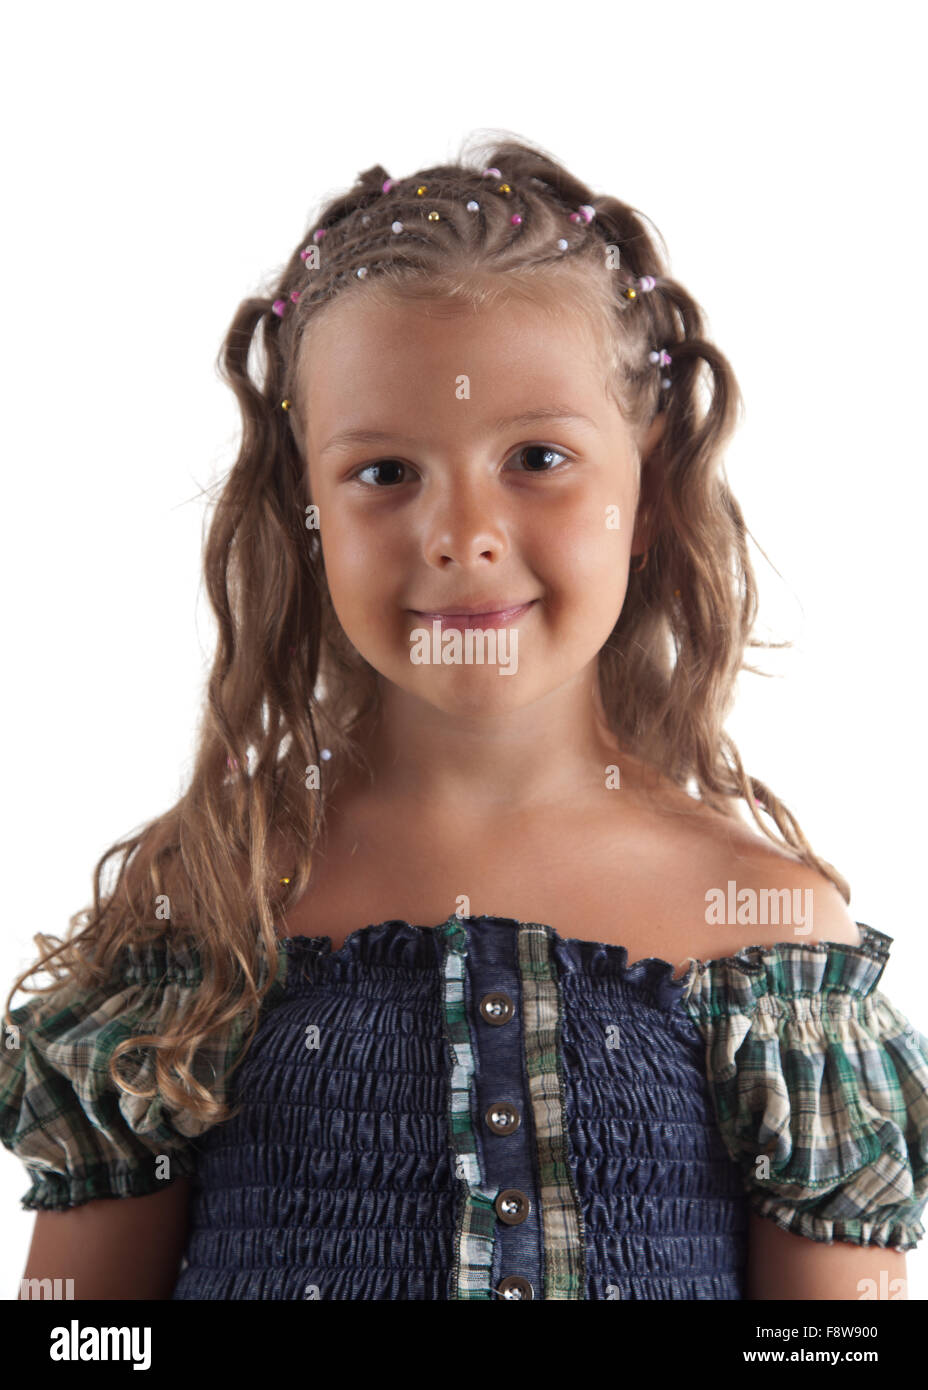 Cute little girl with pigtail hairstyle Stock Photo